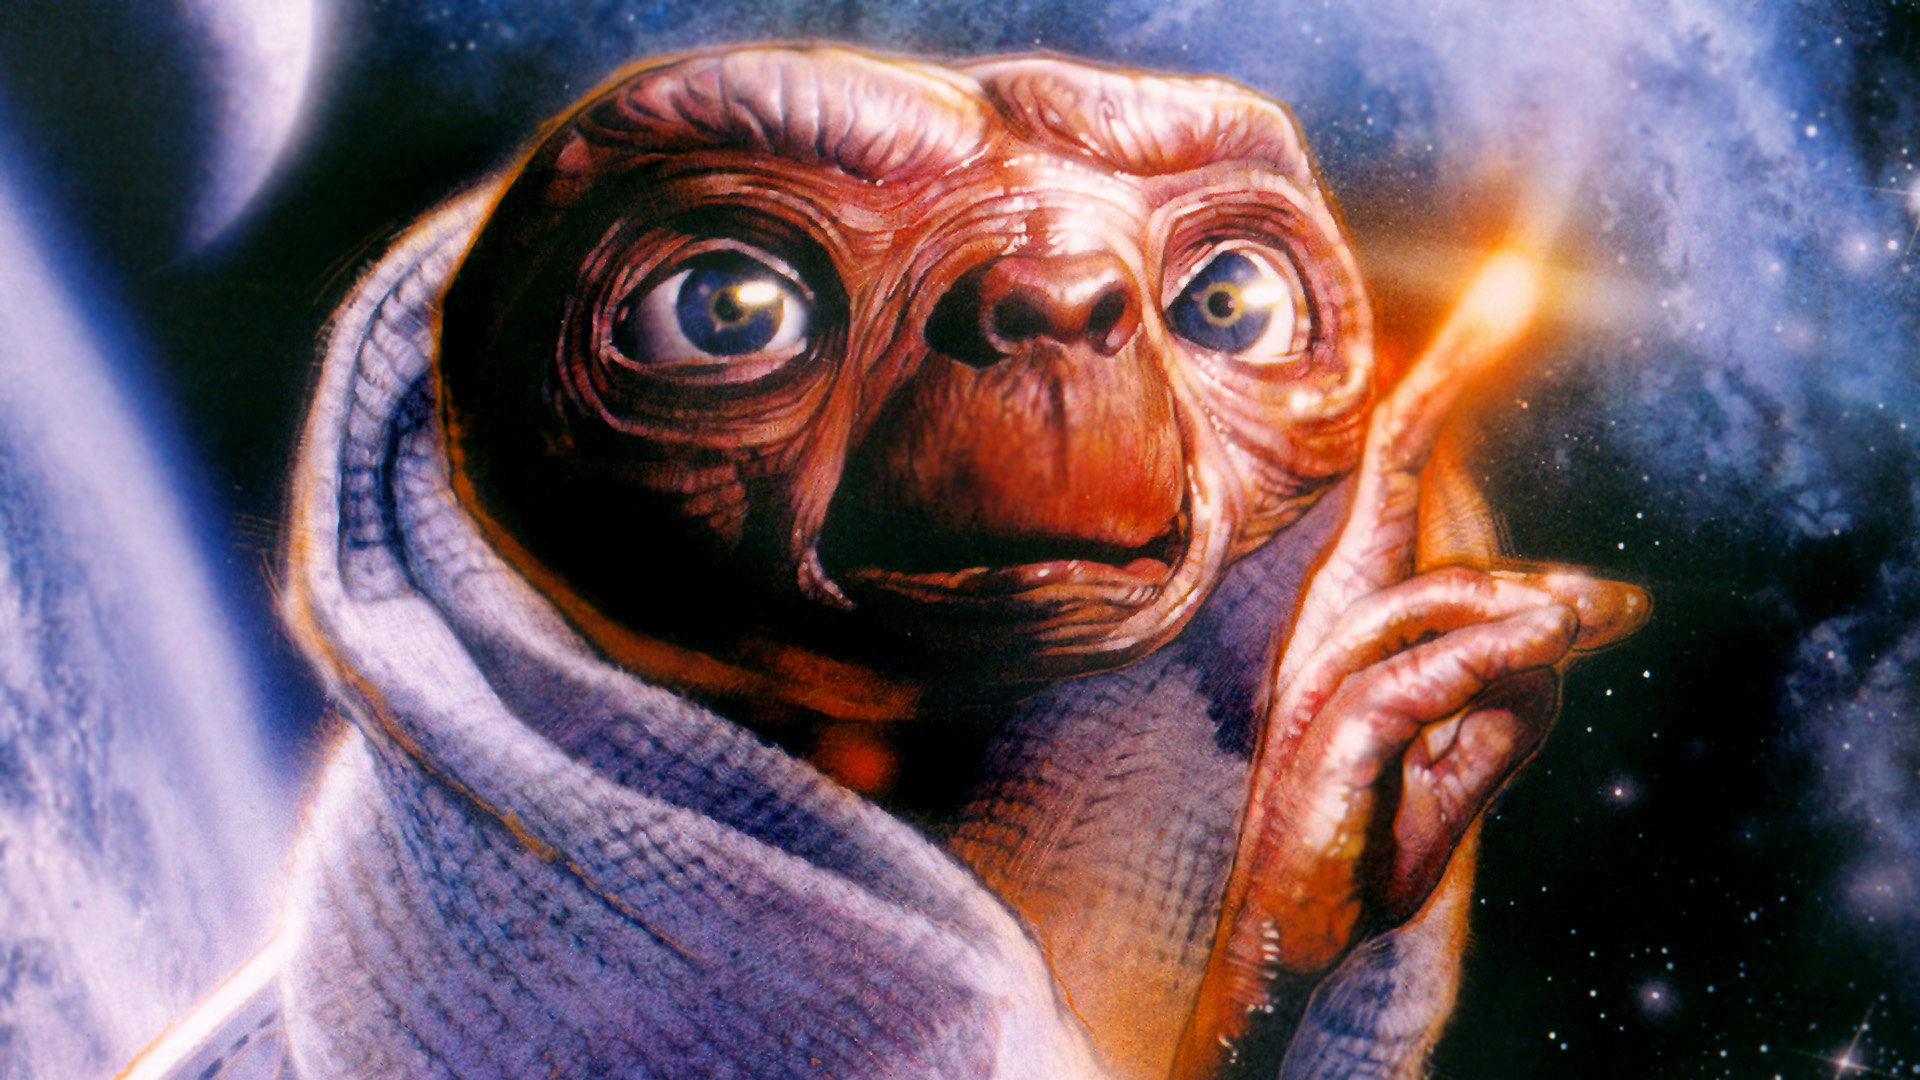 Download full hd 1920x1080 E.T. The Extra-Terrestrial desktop wallpaper ID:47086 for free